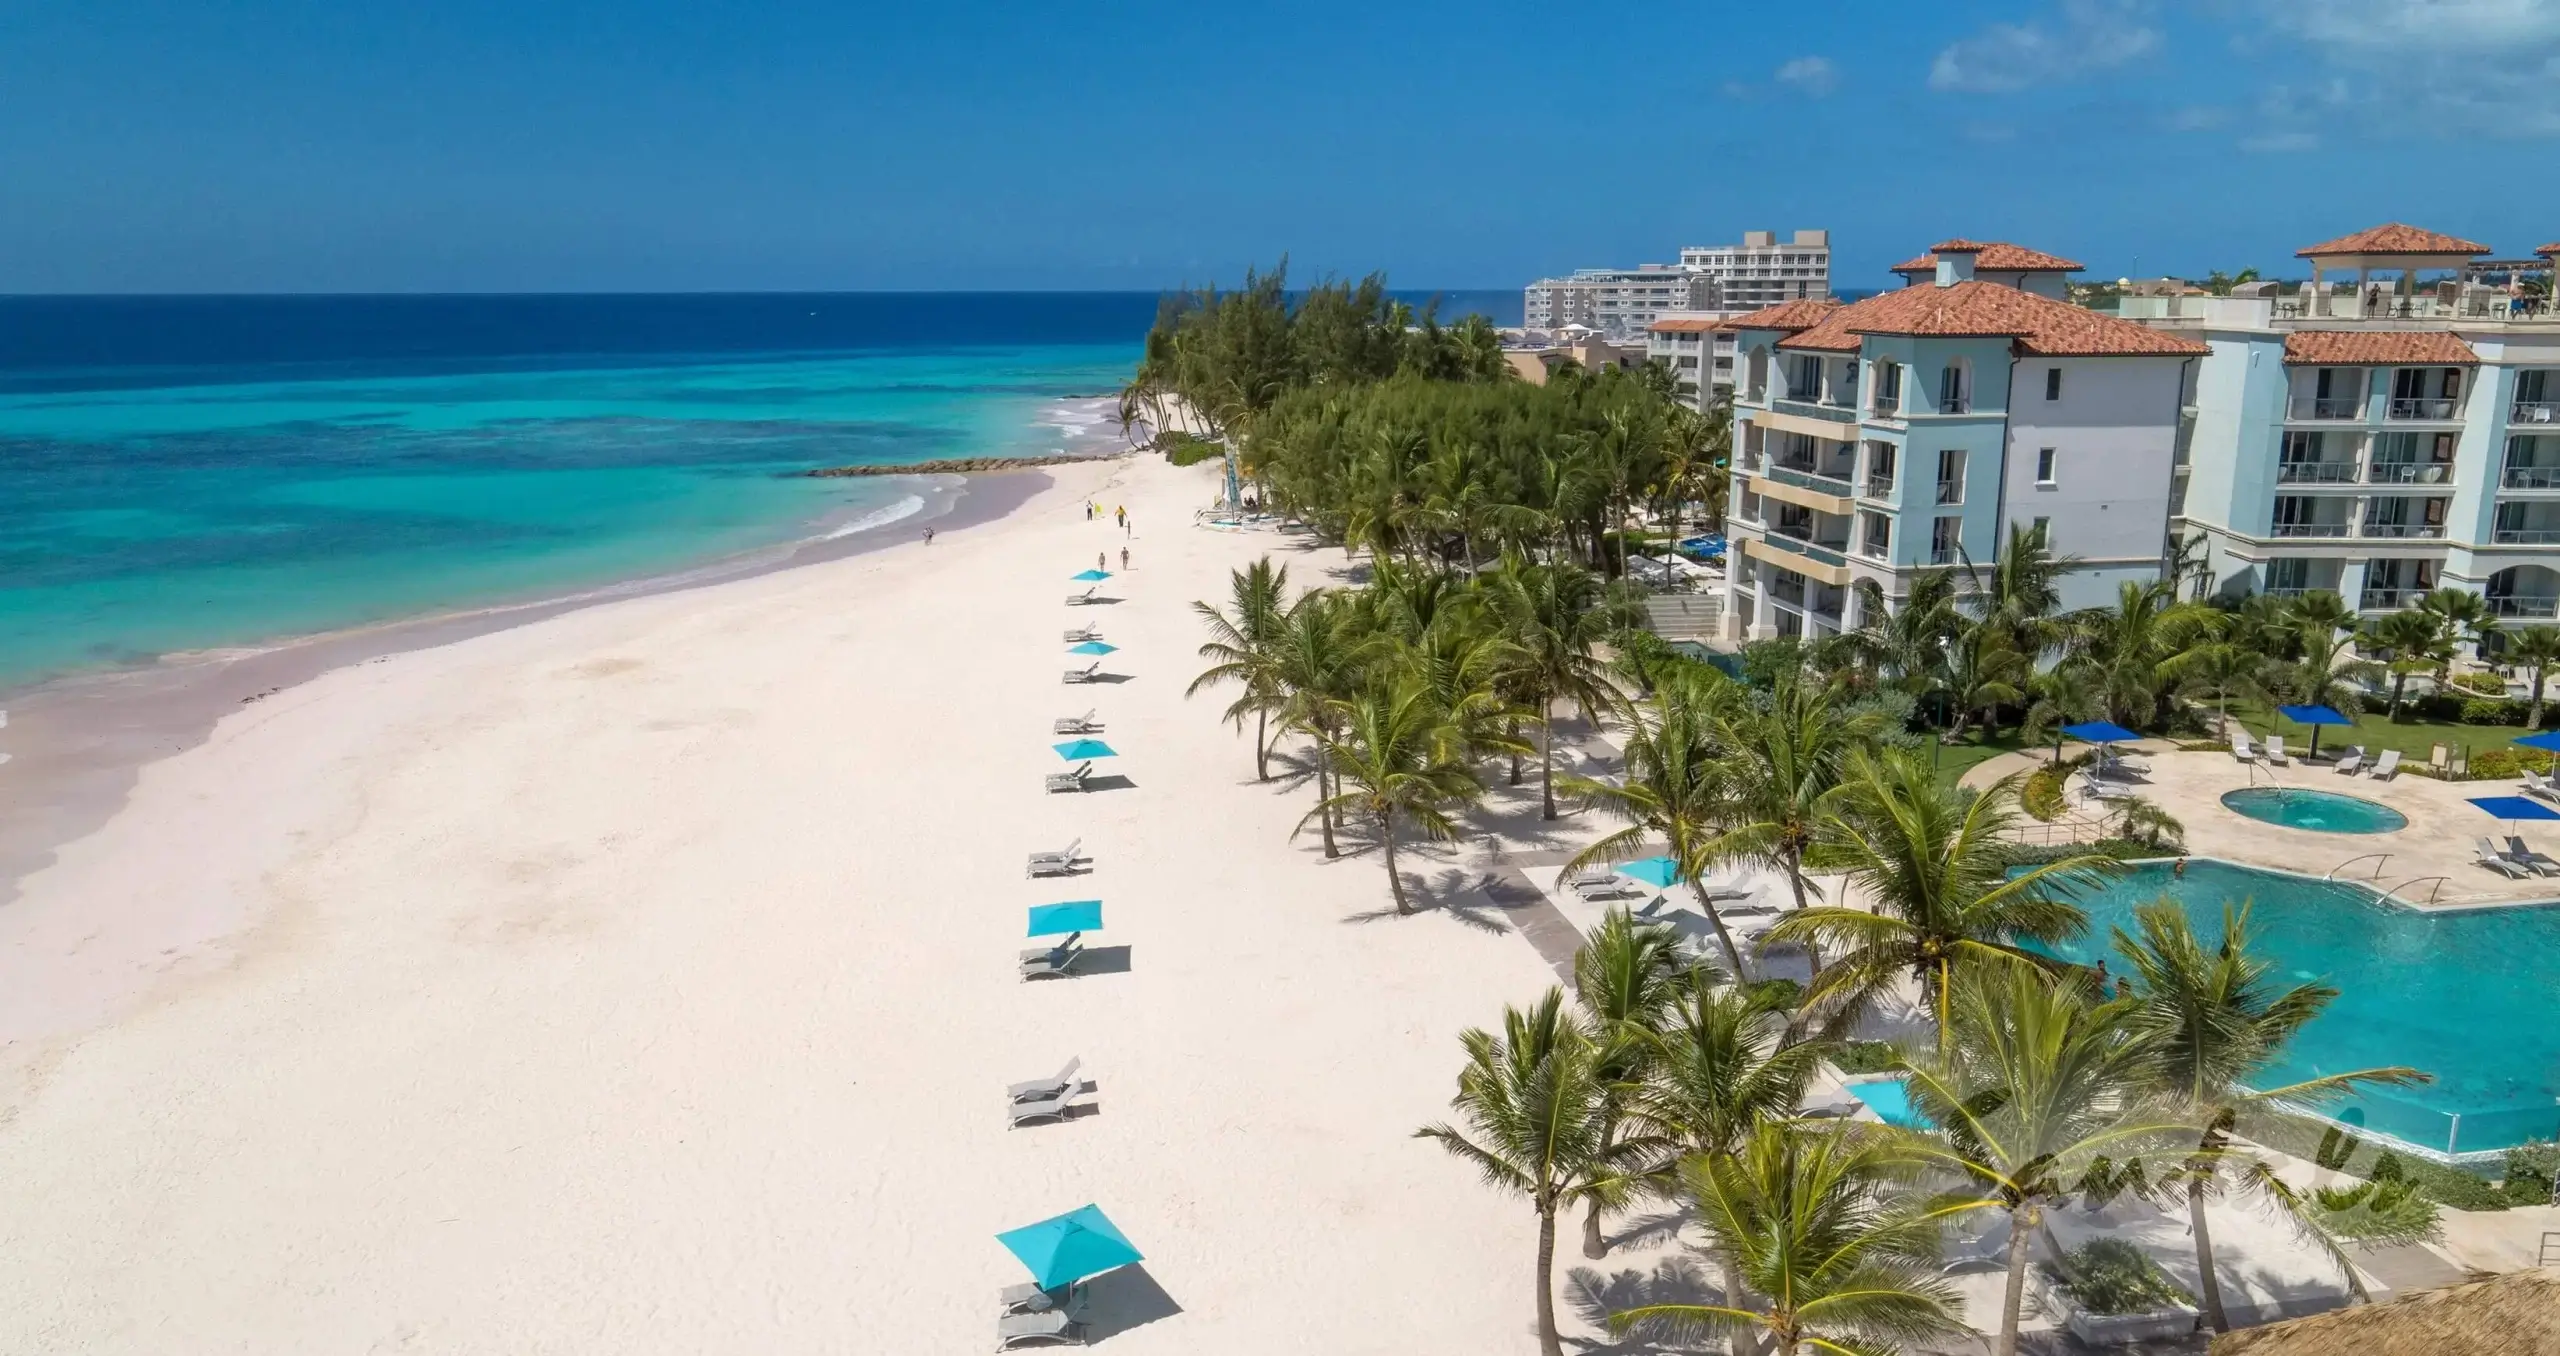 Sandals Barbados white sand beach with clear water and swimming pool.